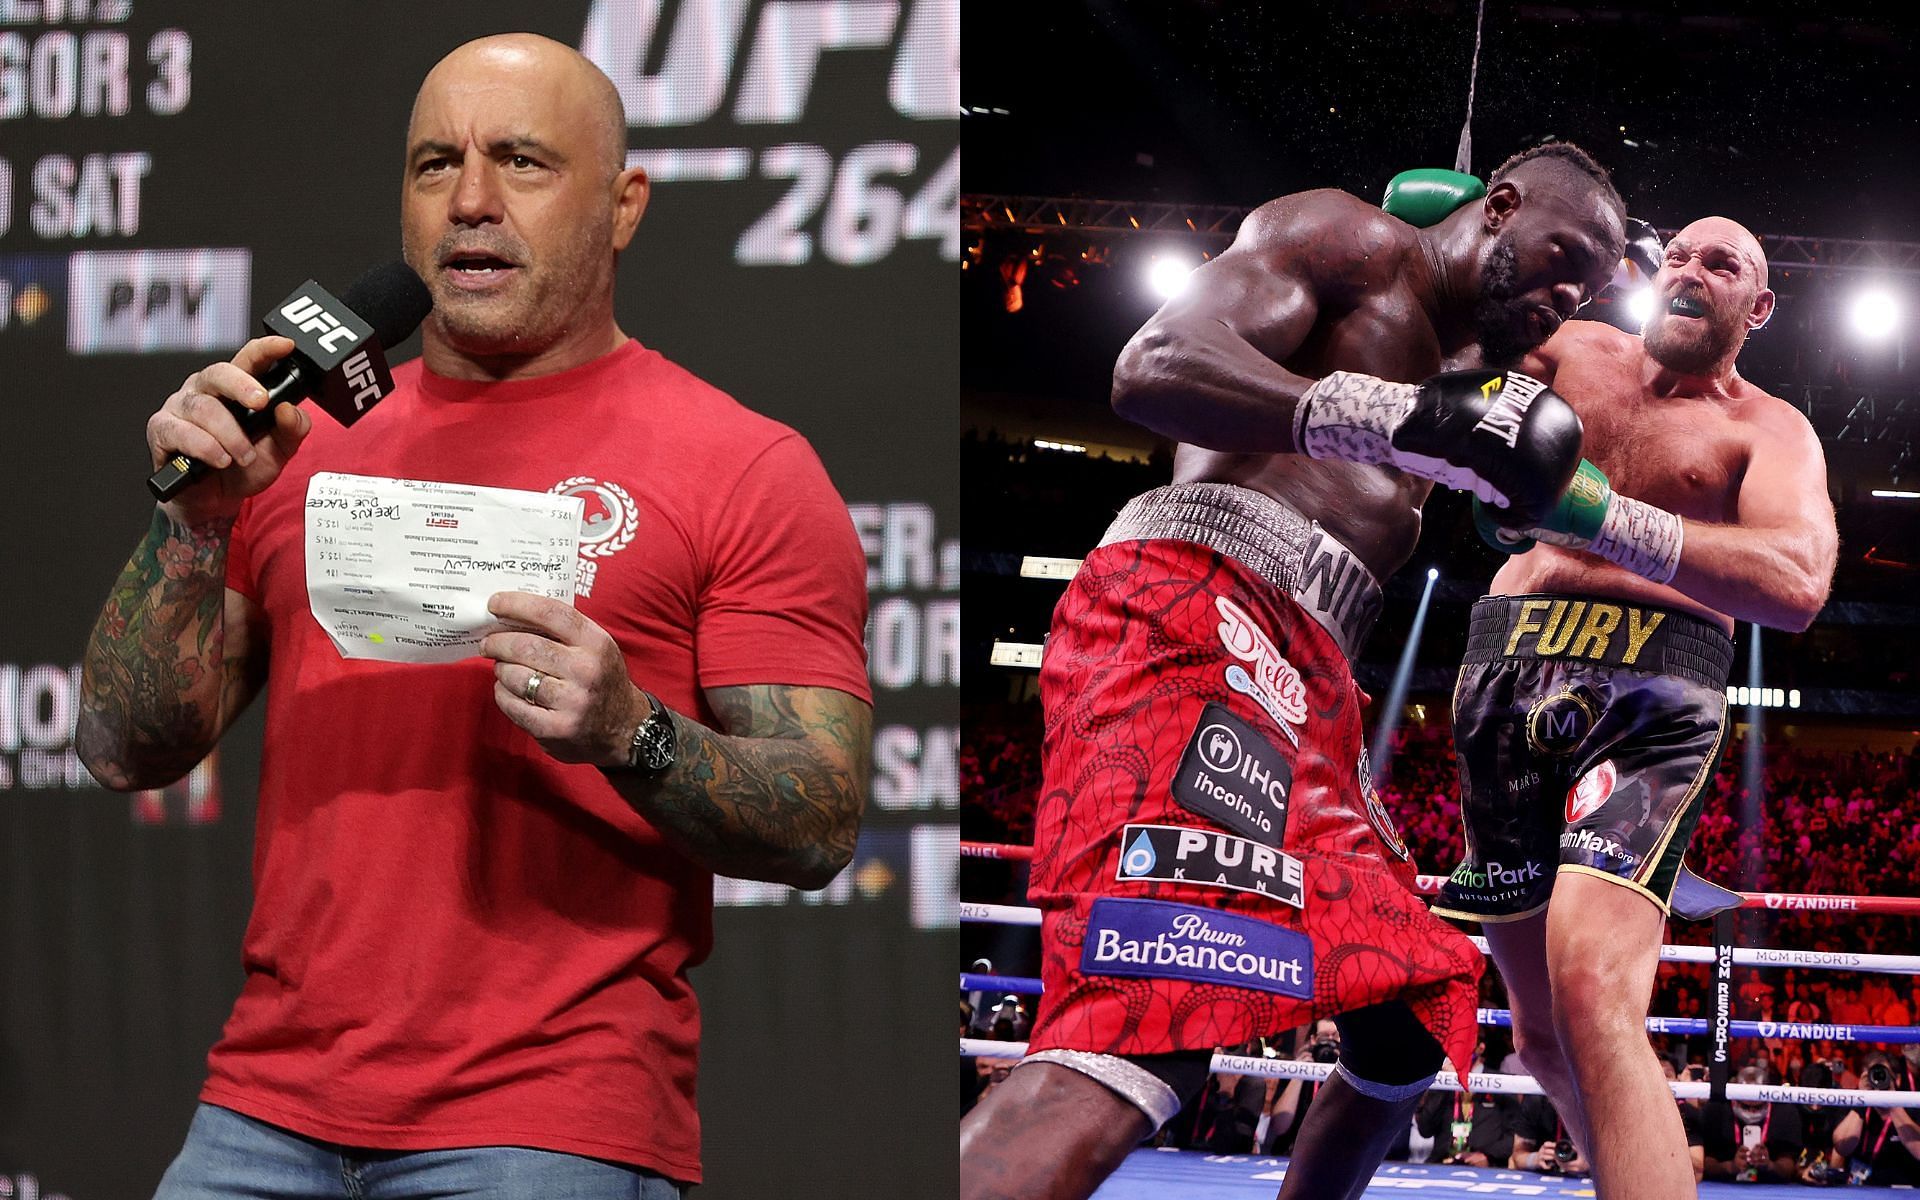 UFC commentator Joe Rogan (left) and action from the Tyson Fury vs. Deontay Wilder bout (right)